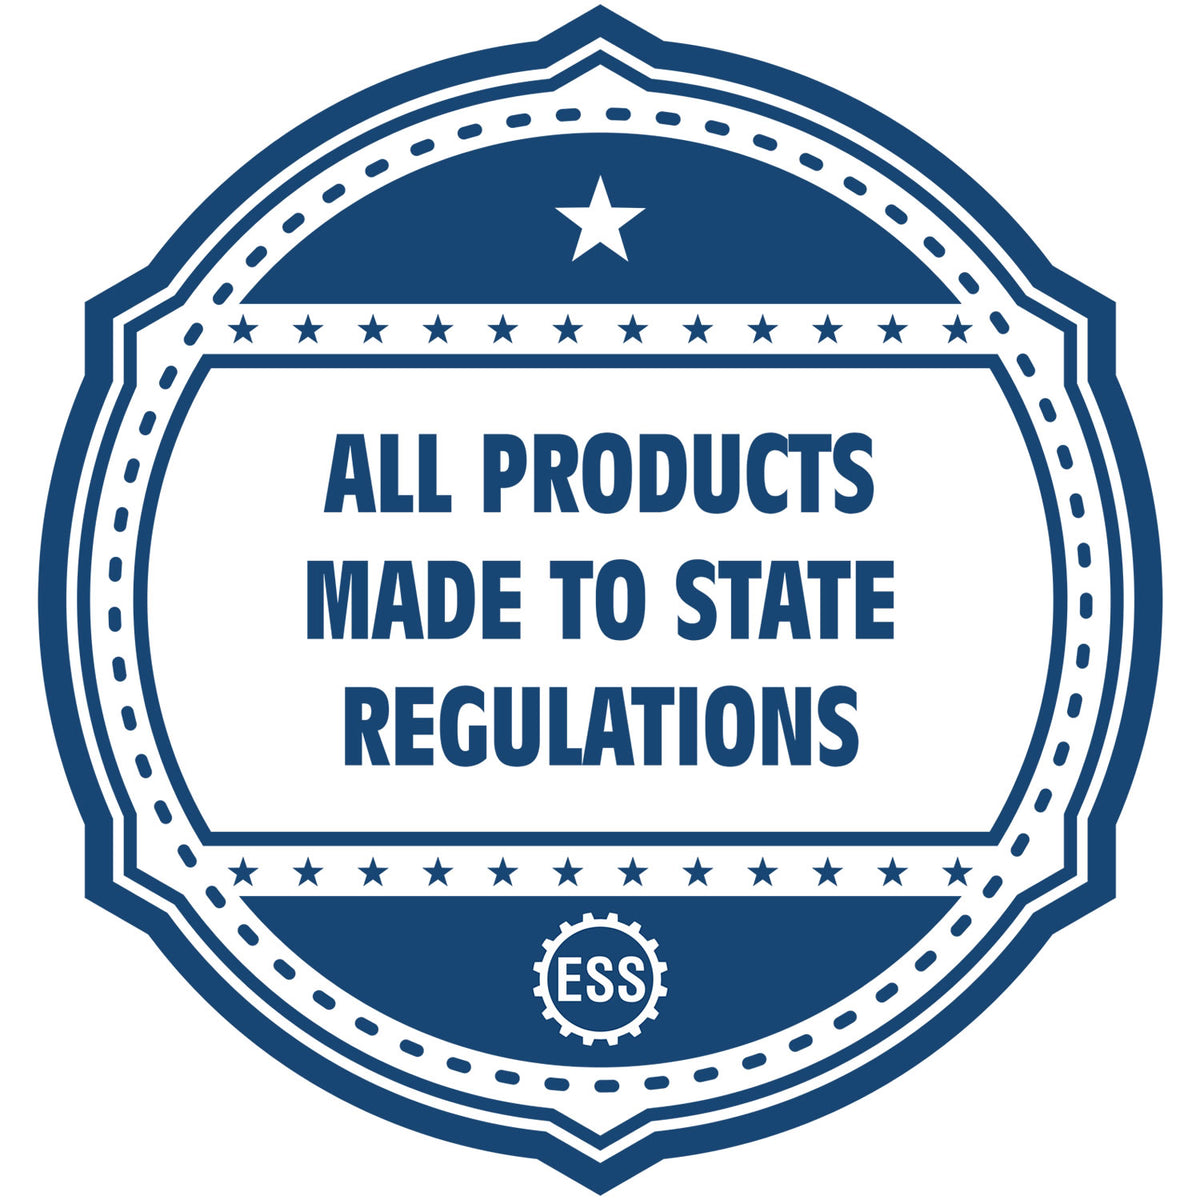 An icon or badge element for the Wooden Handle Rhode Island Rectangular Notary Public Stamp showing that this product is made in compliance with state regulations.